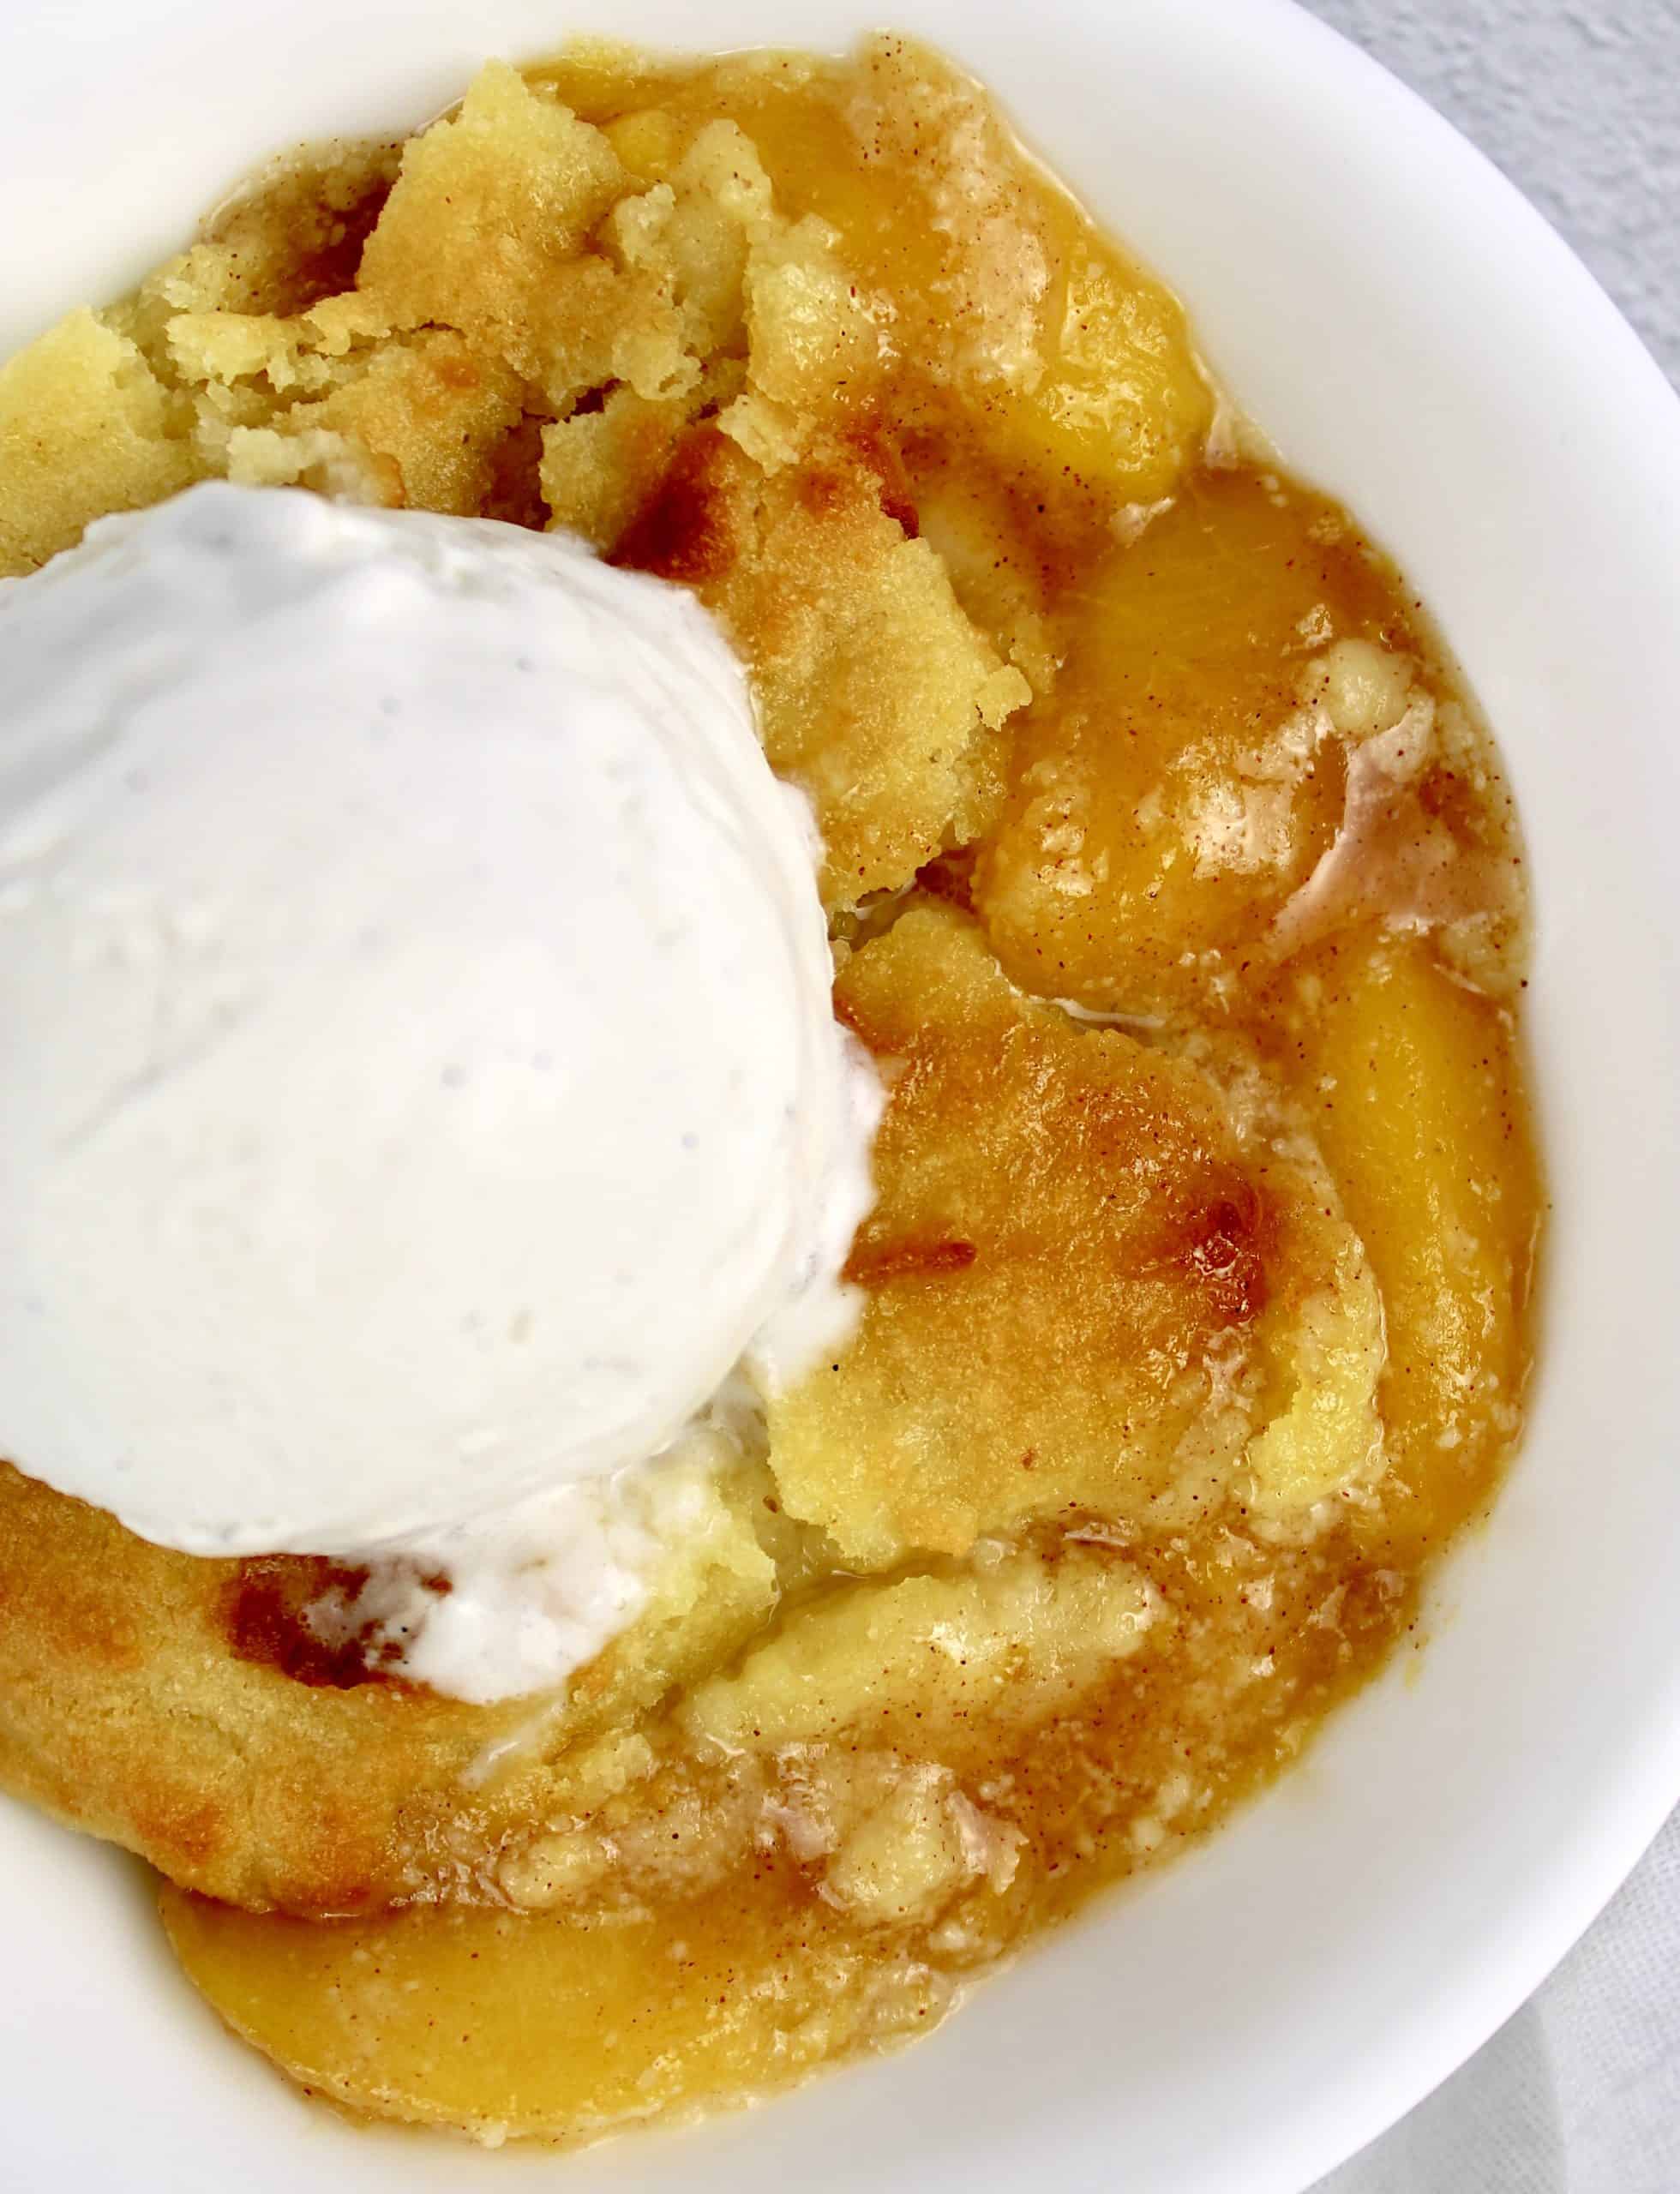 Peach Cobbler in white bowl with scoop of vanilla ice cream on top